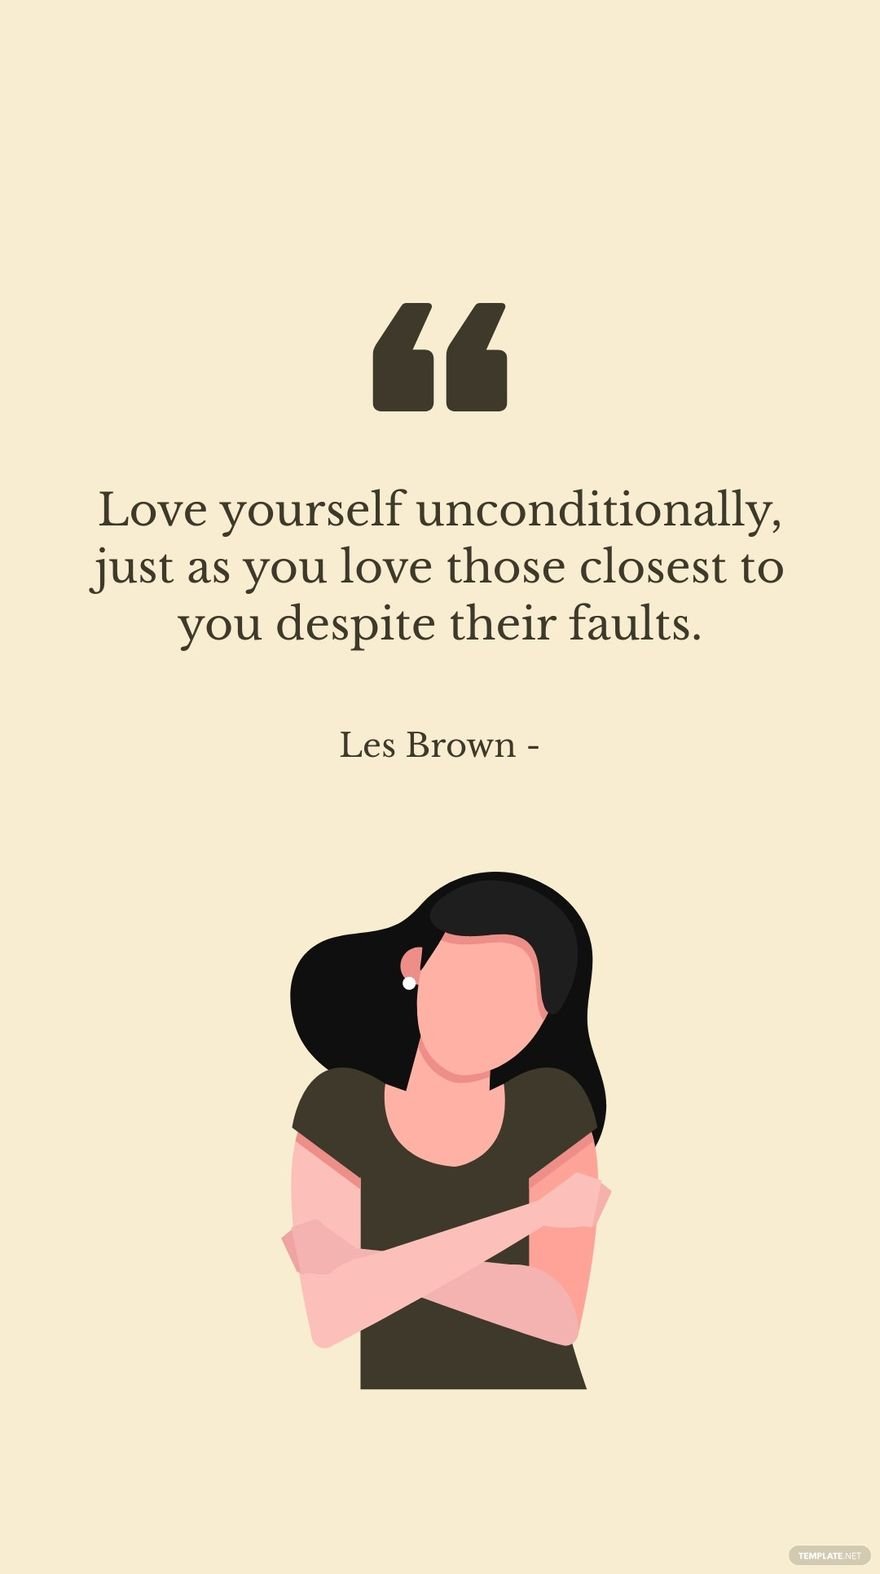 Free Les Brown - Love yourself unconditionally, just as you love those closest to you despite their faults.